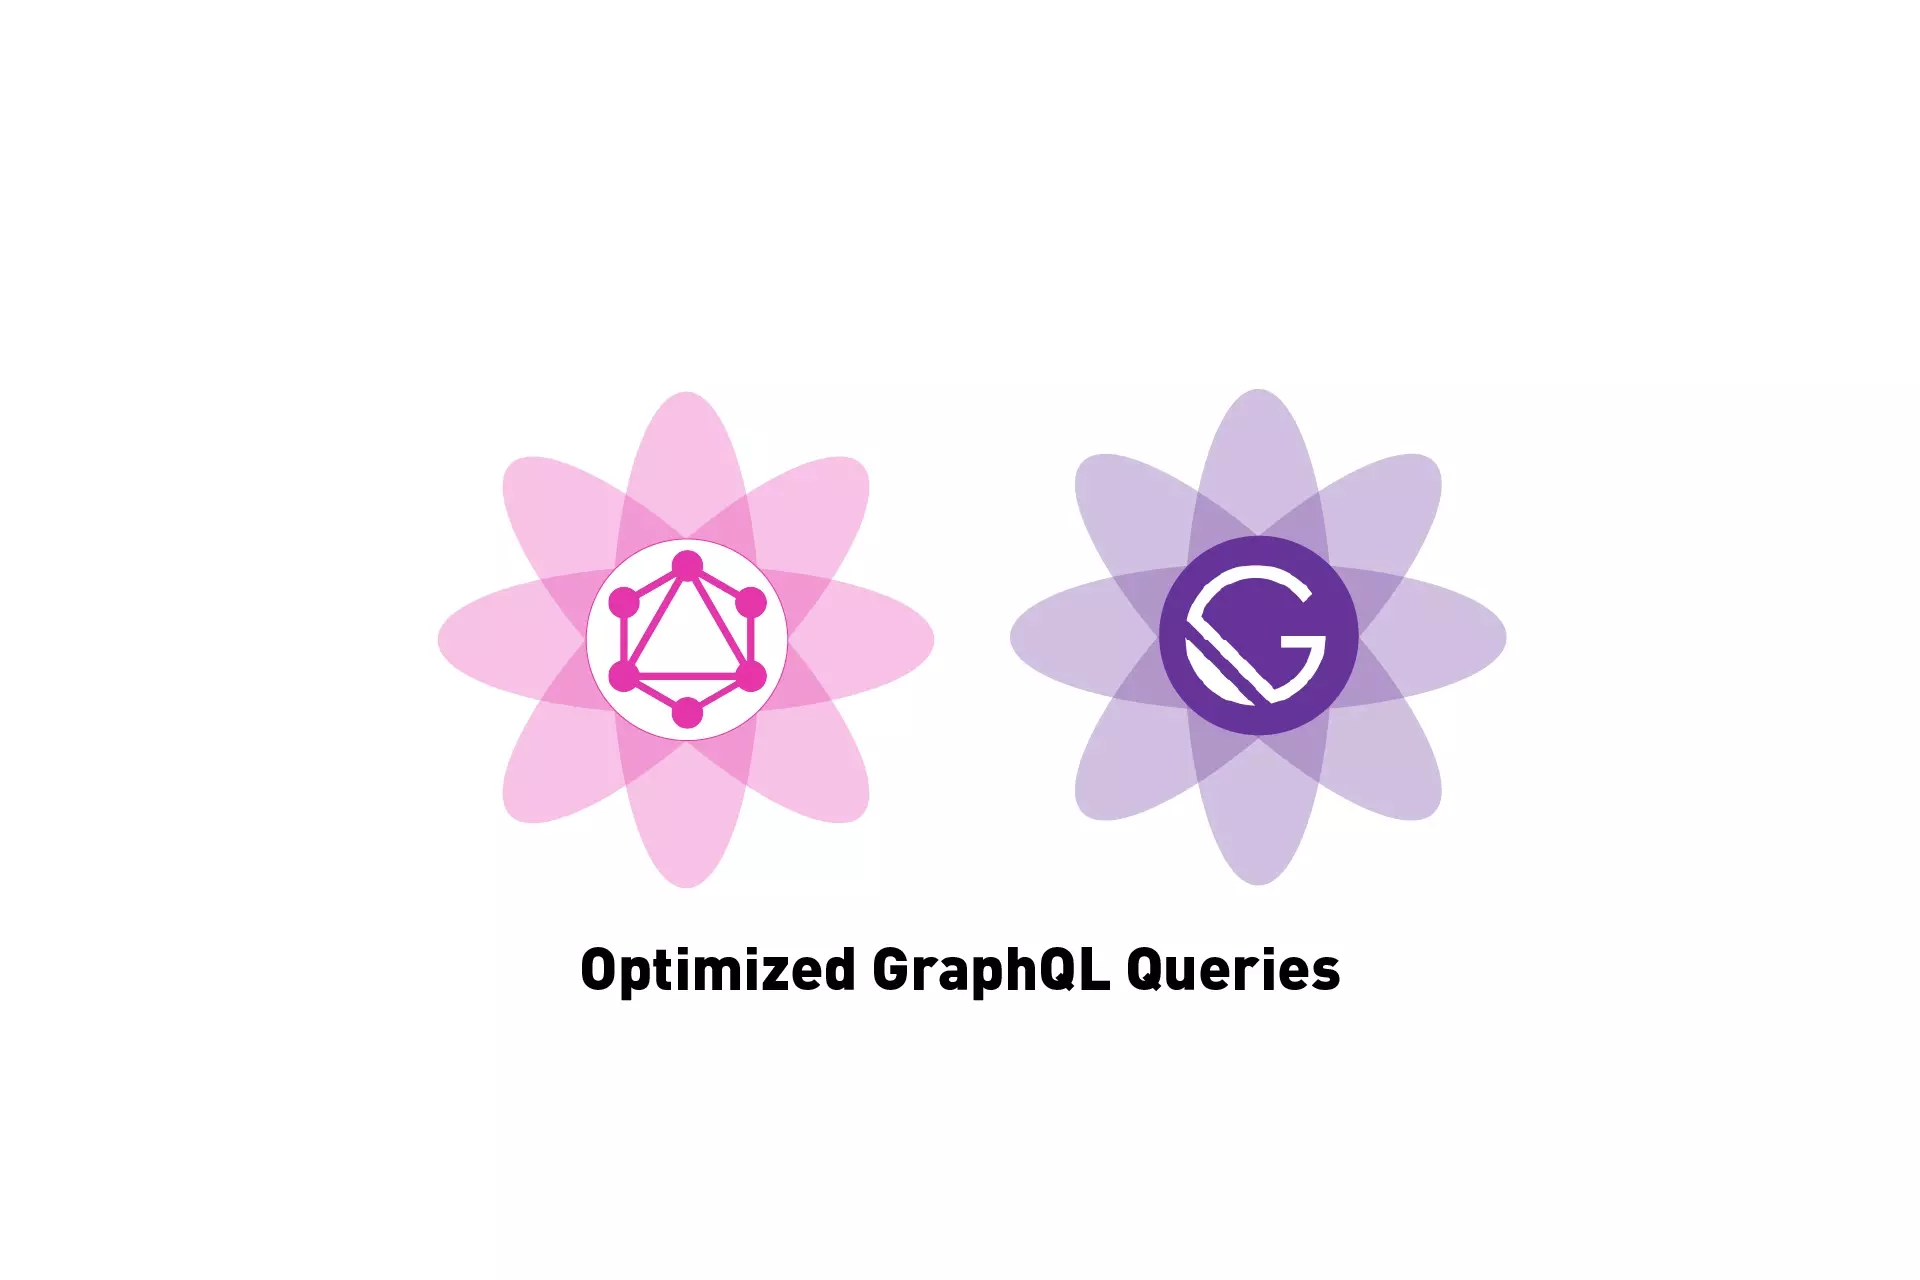 A flower that represents GraphQL next to one that represents GatsbyJS. Beneath it sits the text "Optimized GraphQL Queries".